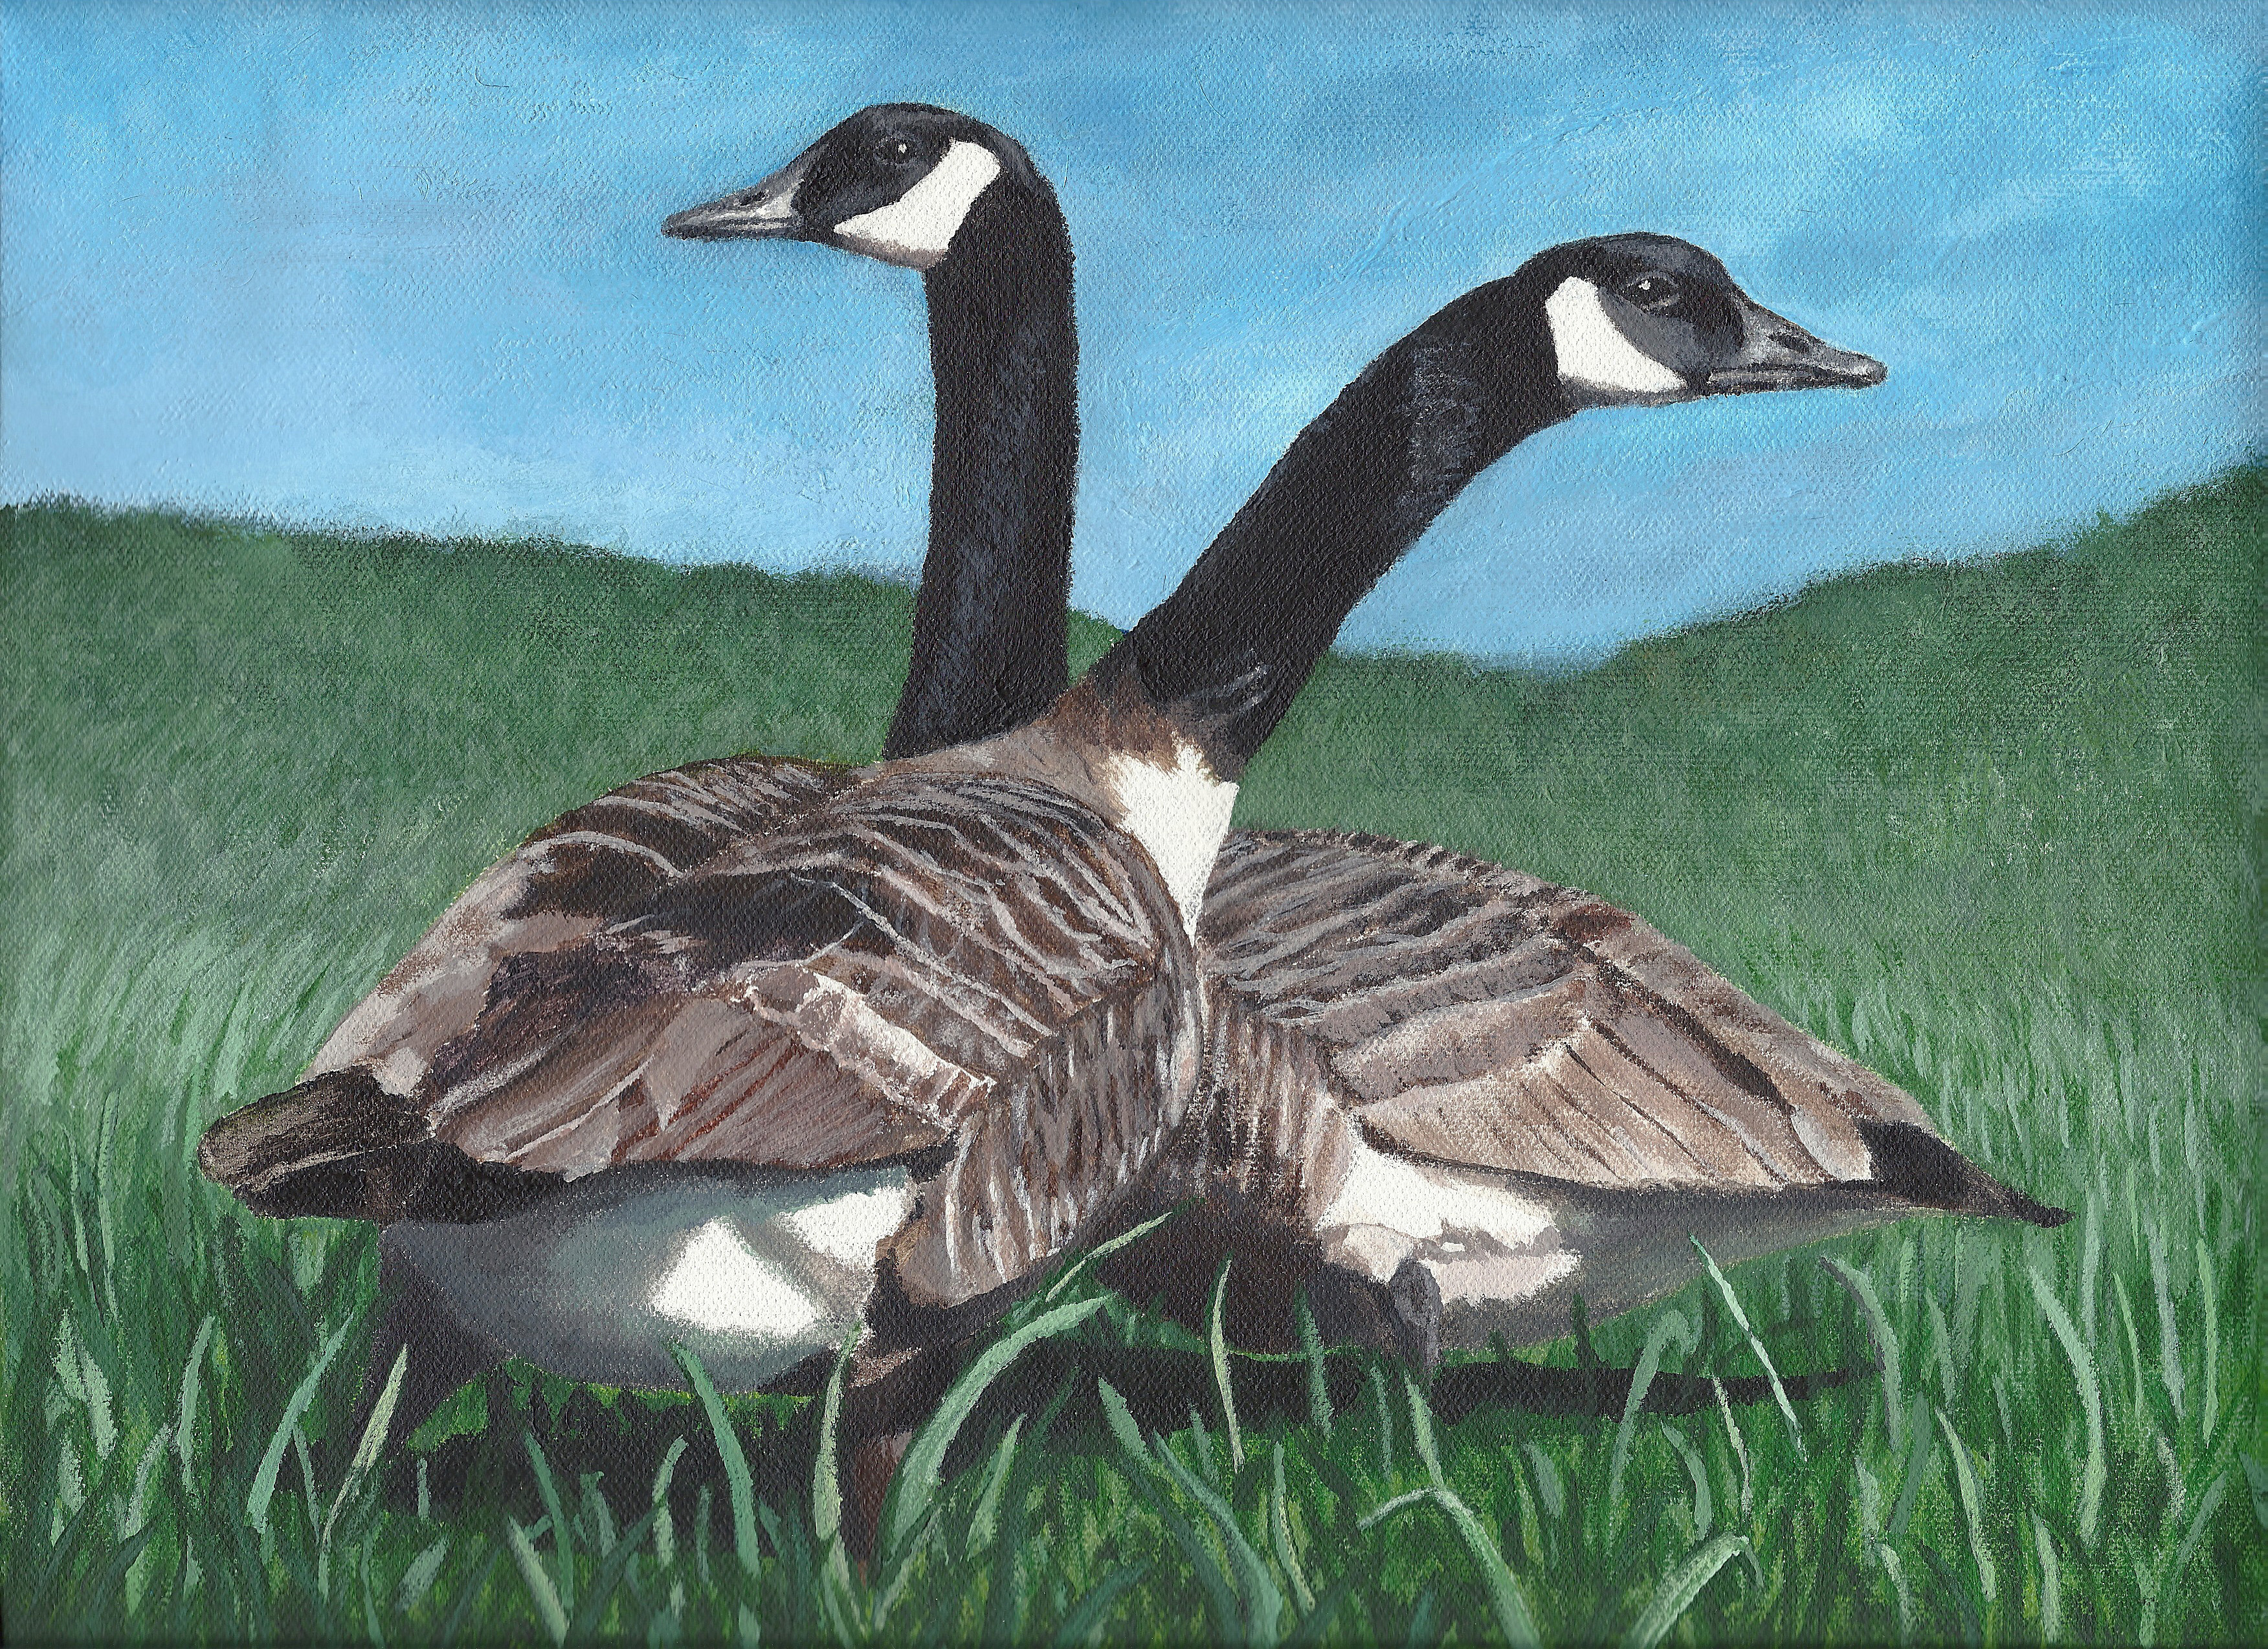 The finalist from West Virginia for the 2011 Junior Duck Stamp Art Contest. (5597884161)